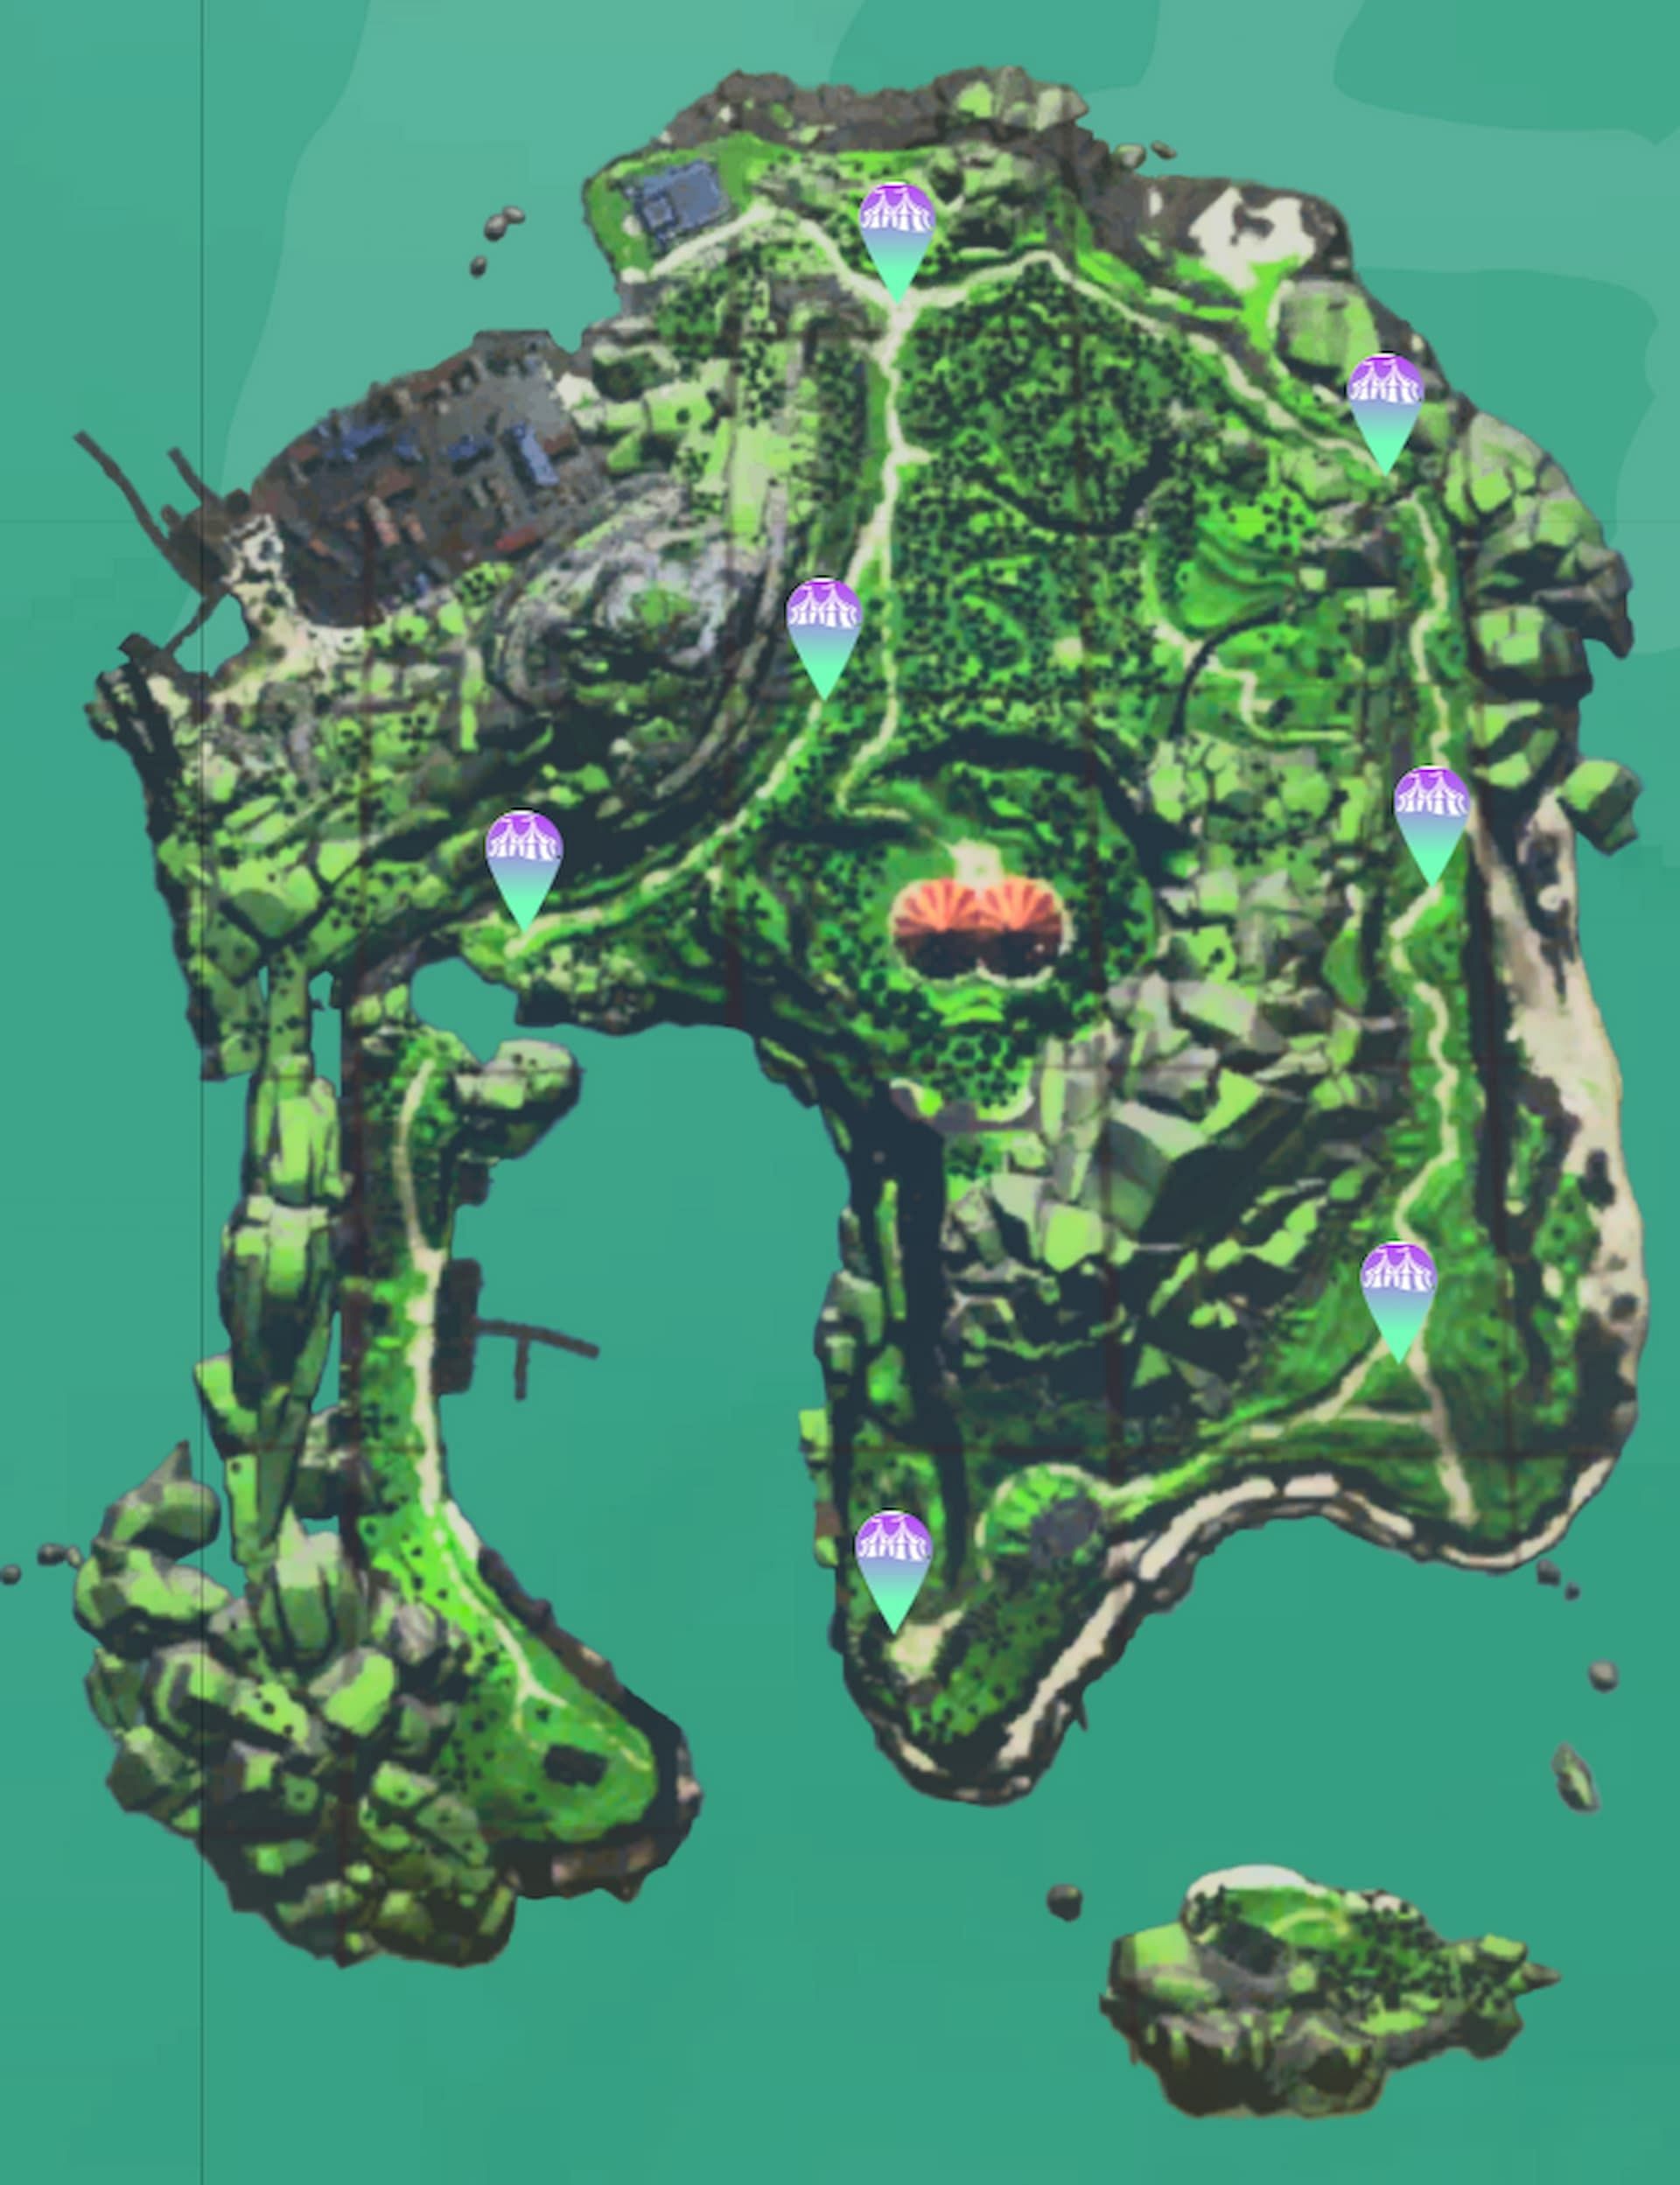 Location of all swordfighters on Melee Island (Image via Rare Theif)